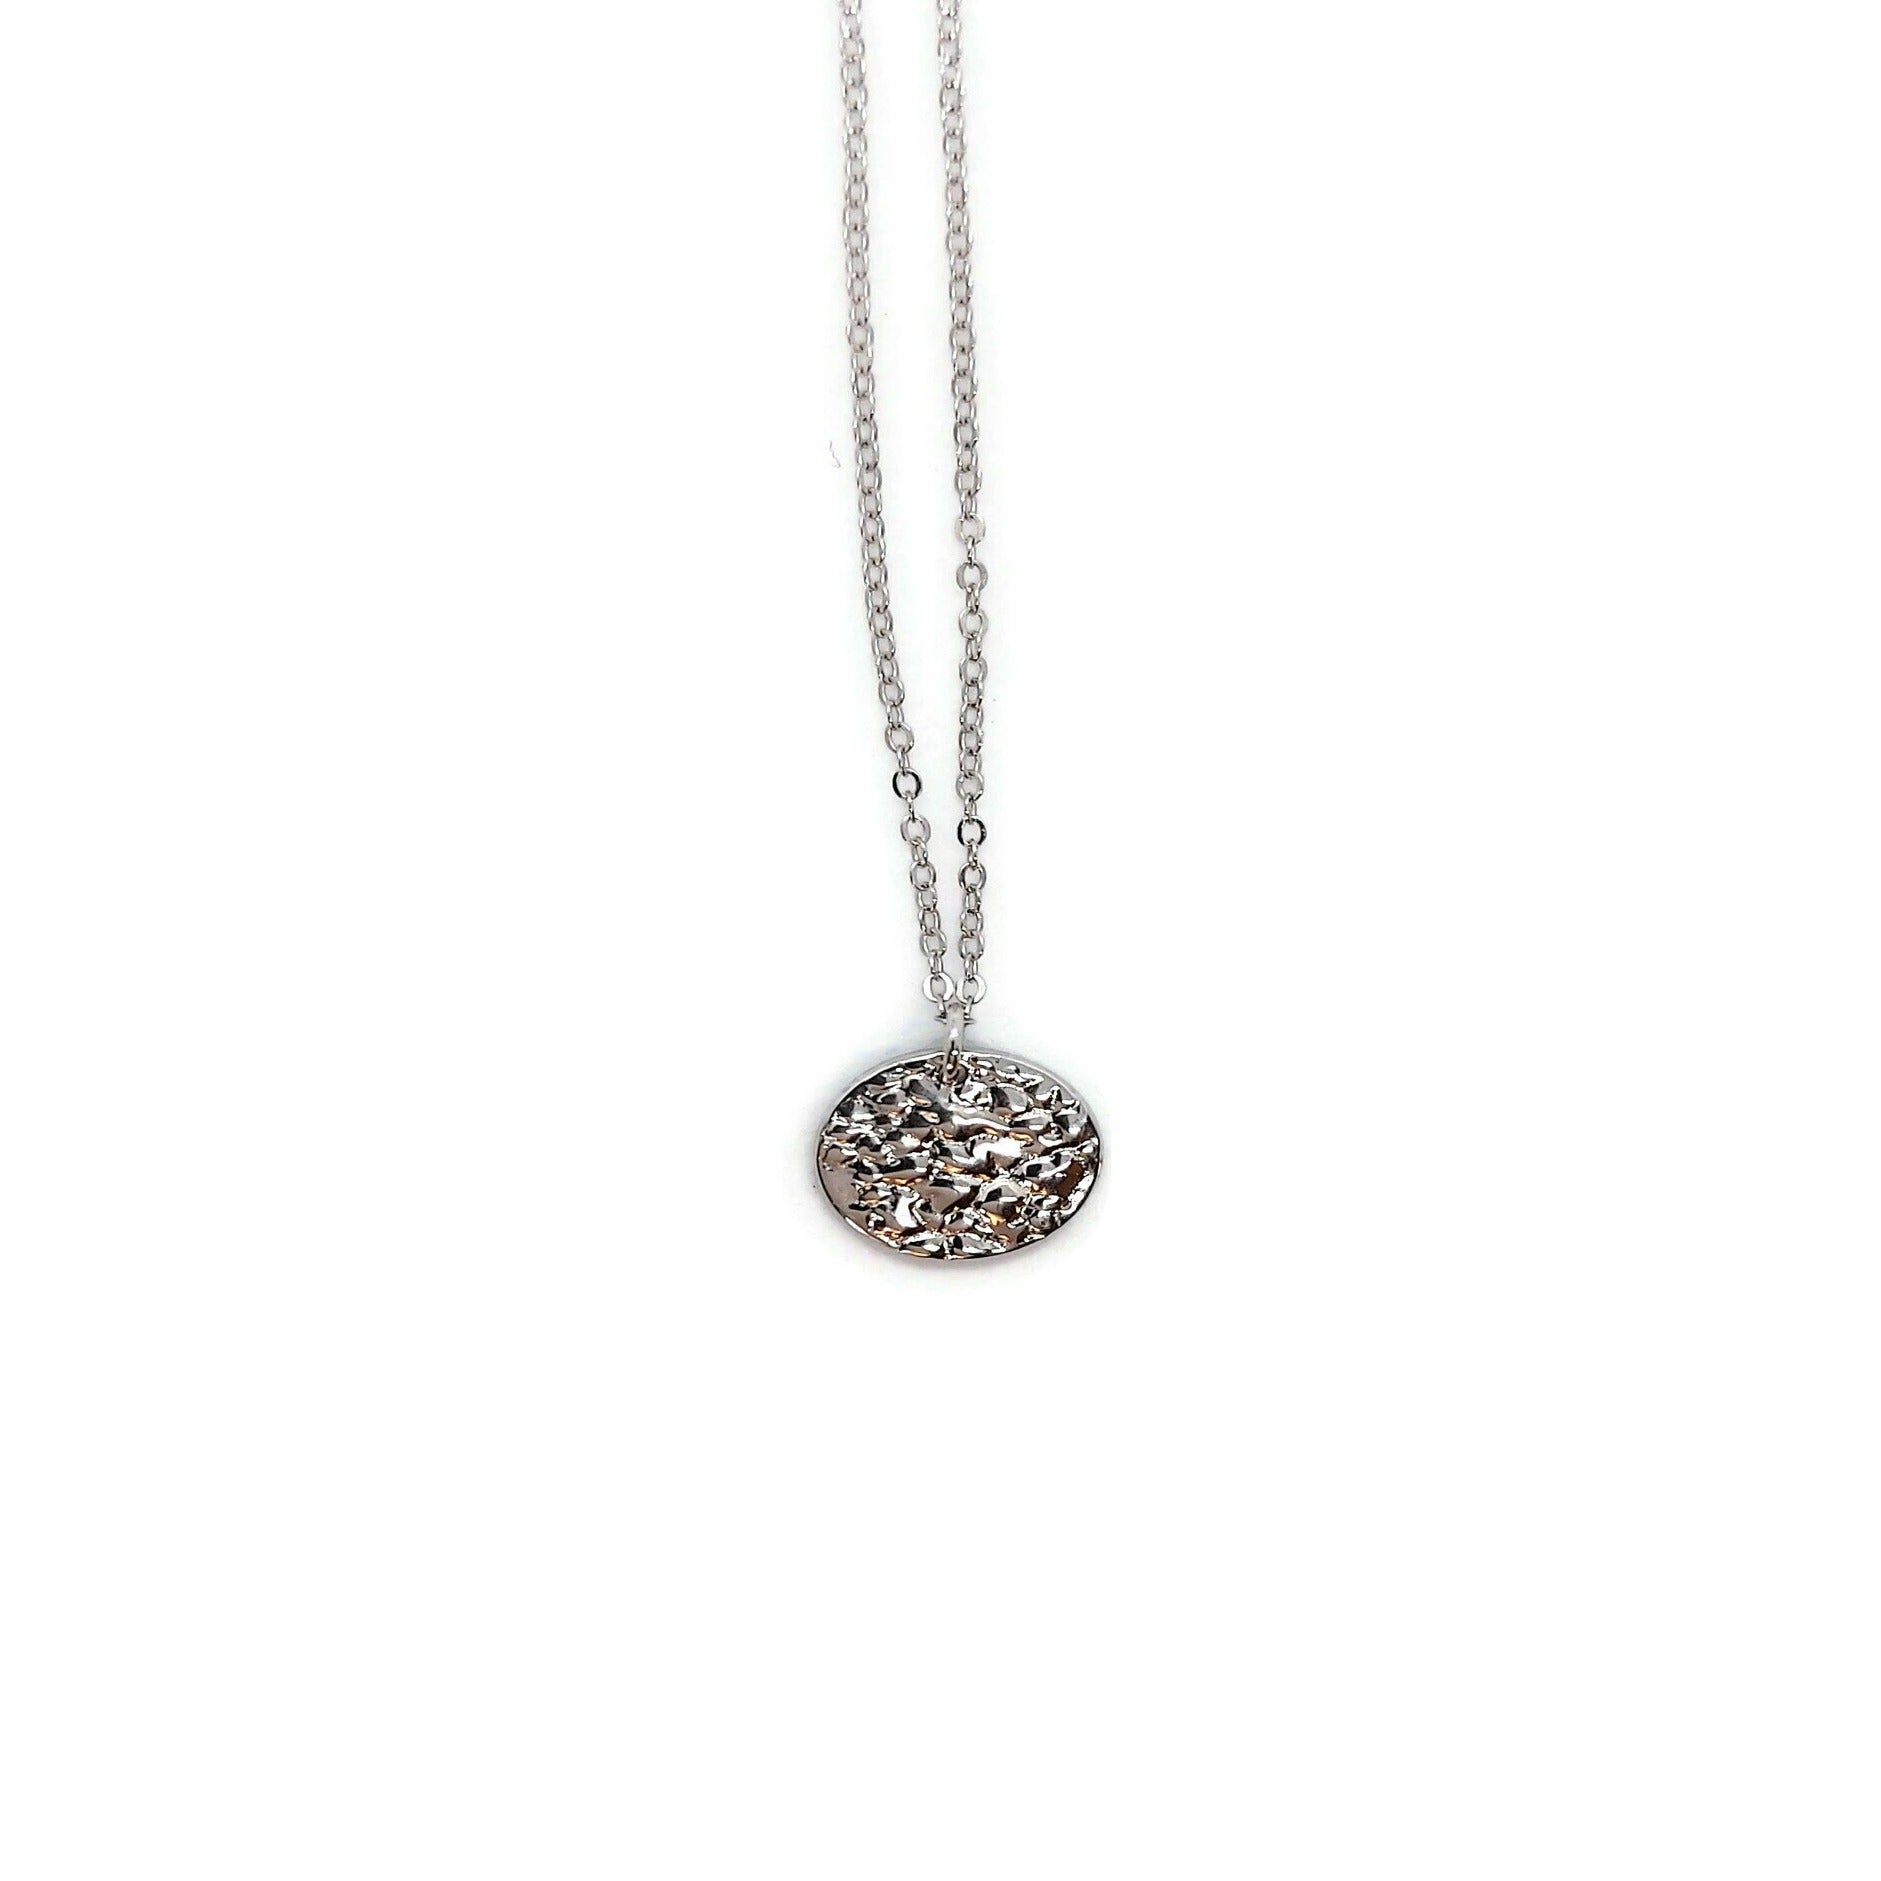 925 sterling silver Sol Textured Small Circle Pendant Necklace, ocean jewelry